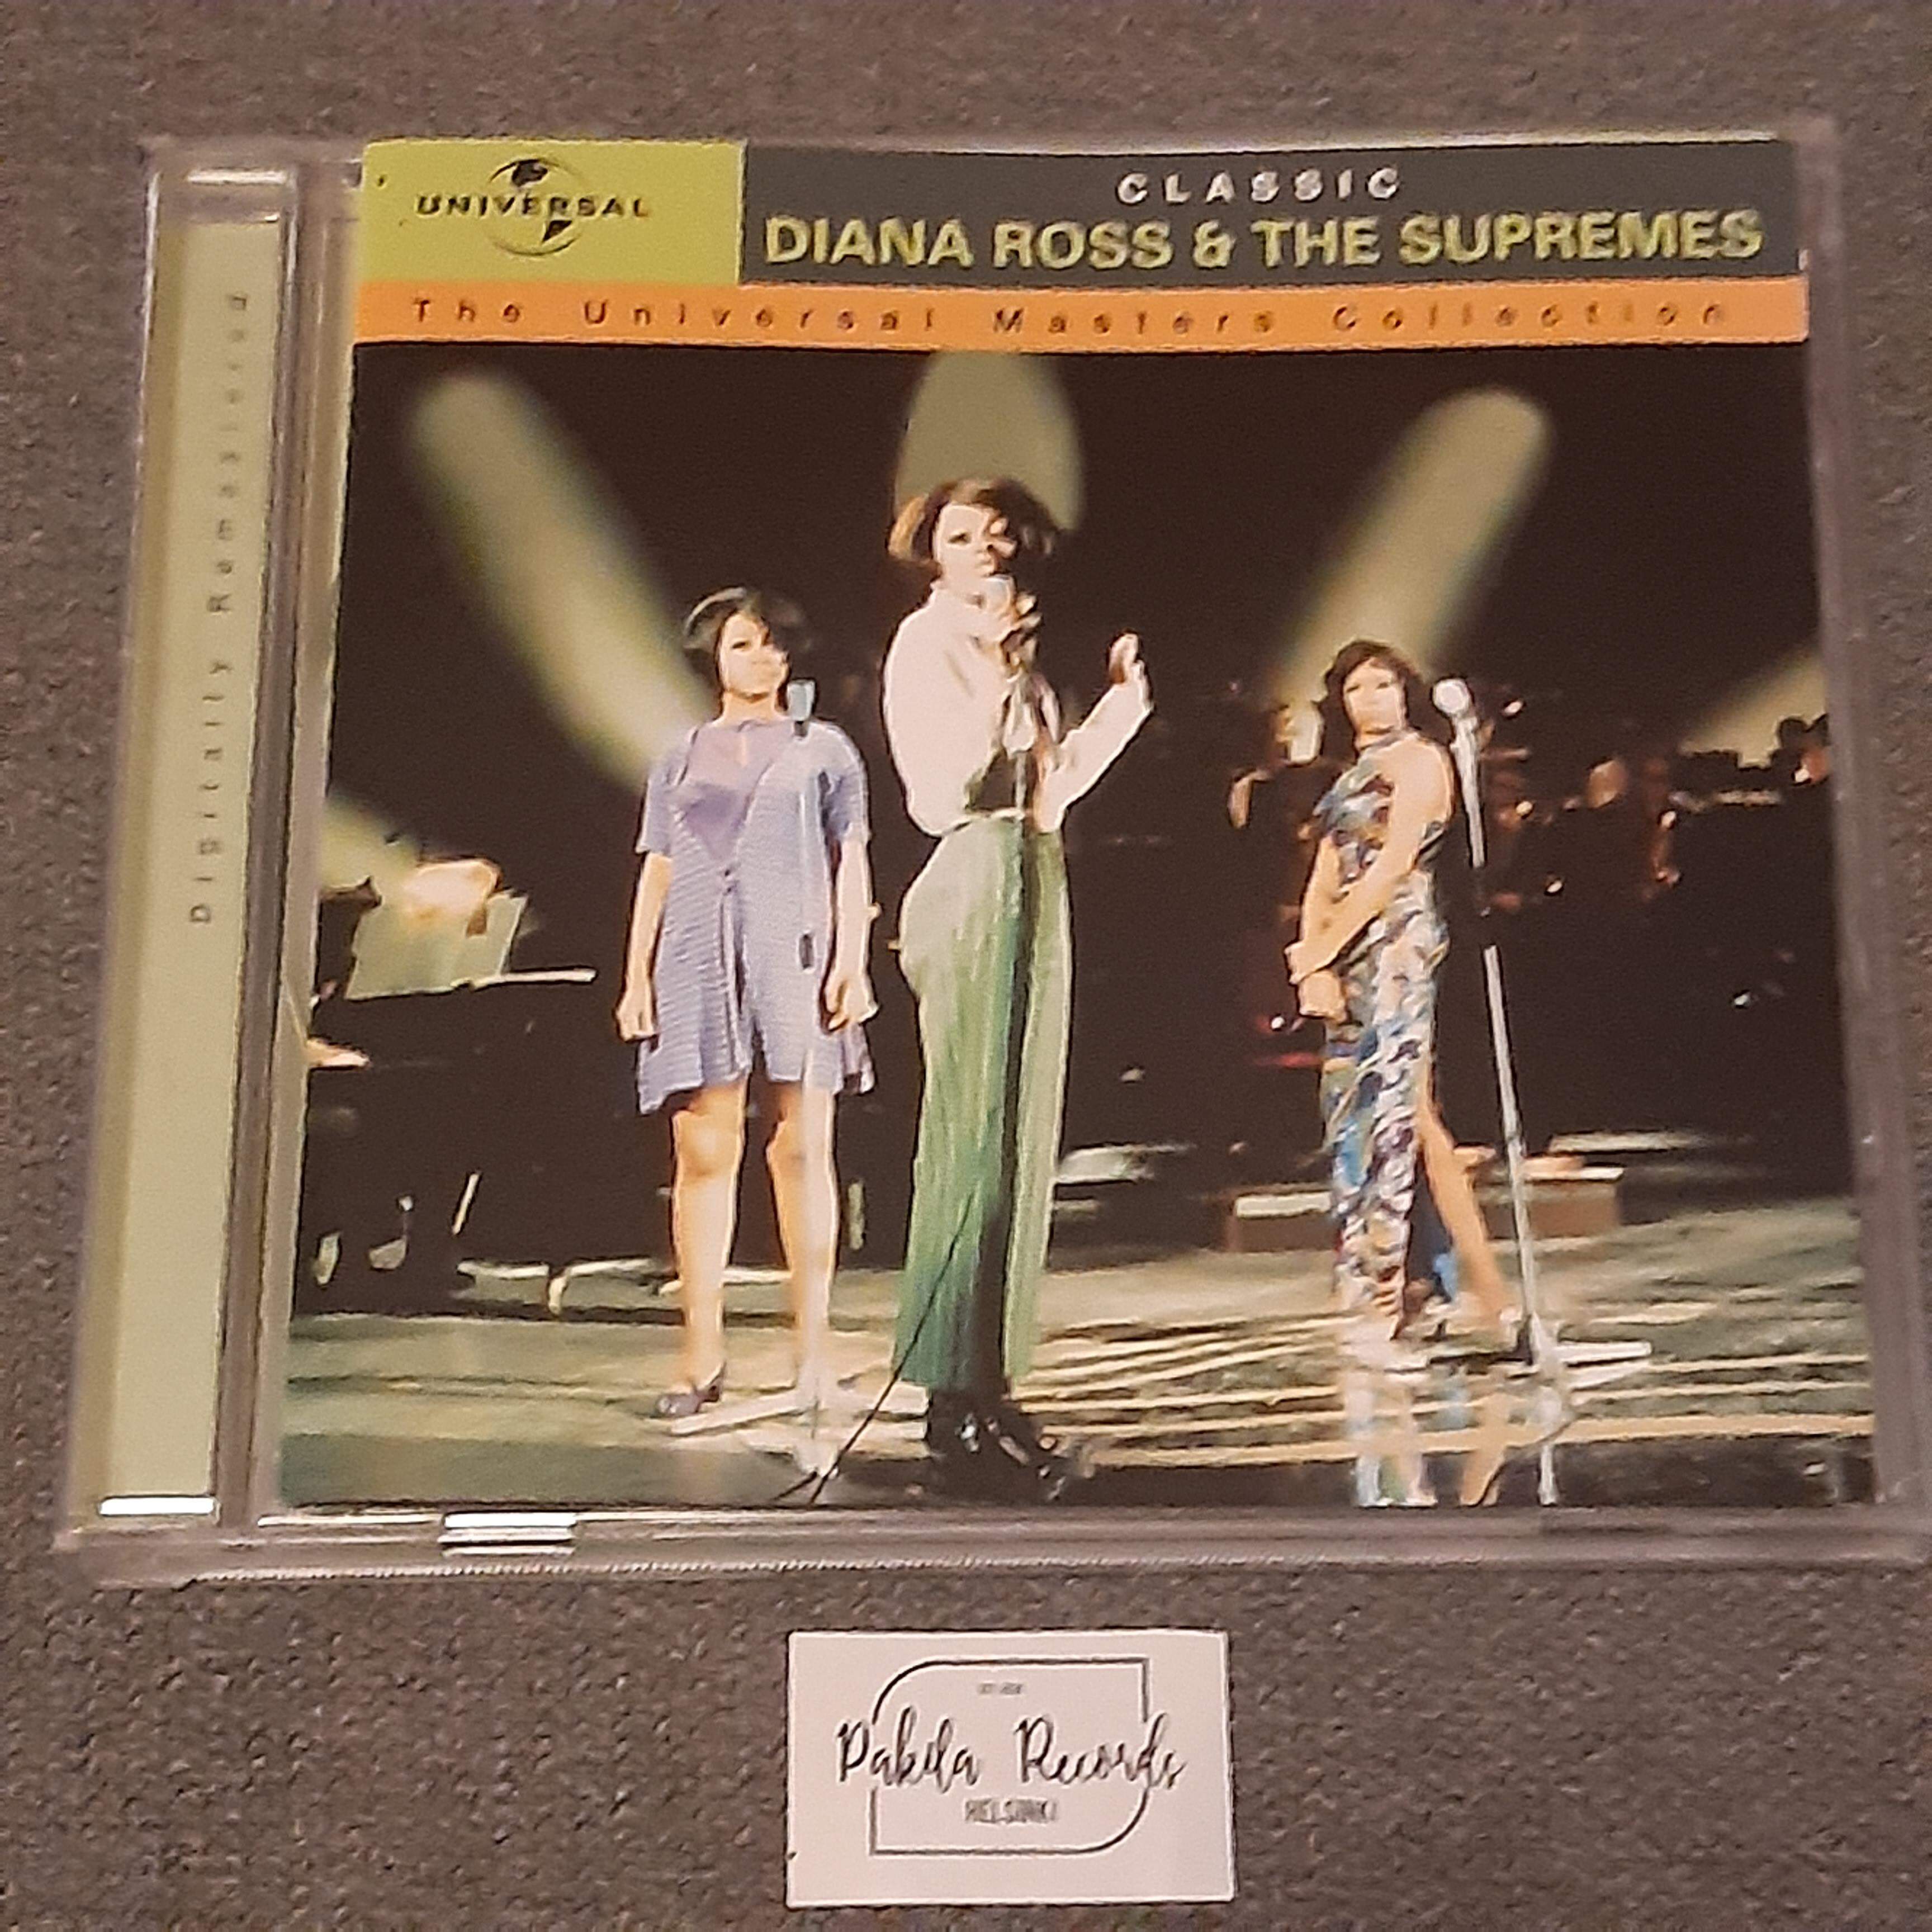 Diana Ross & The Supremes - Classic - CD (käytetty)